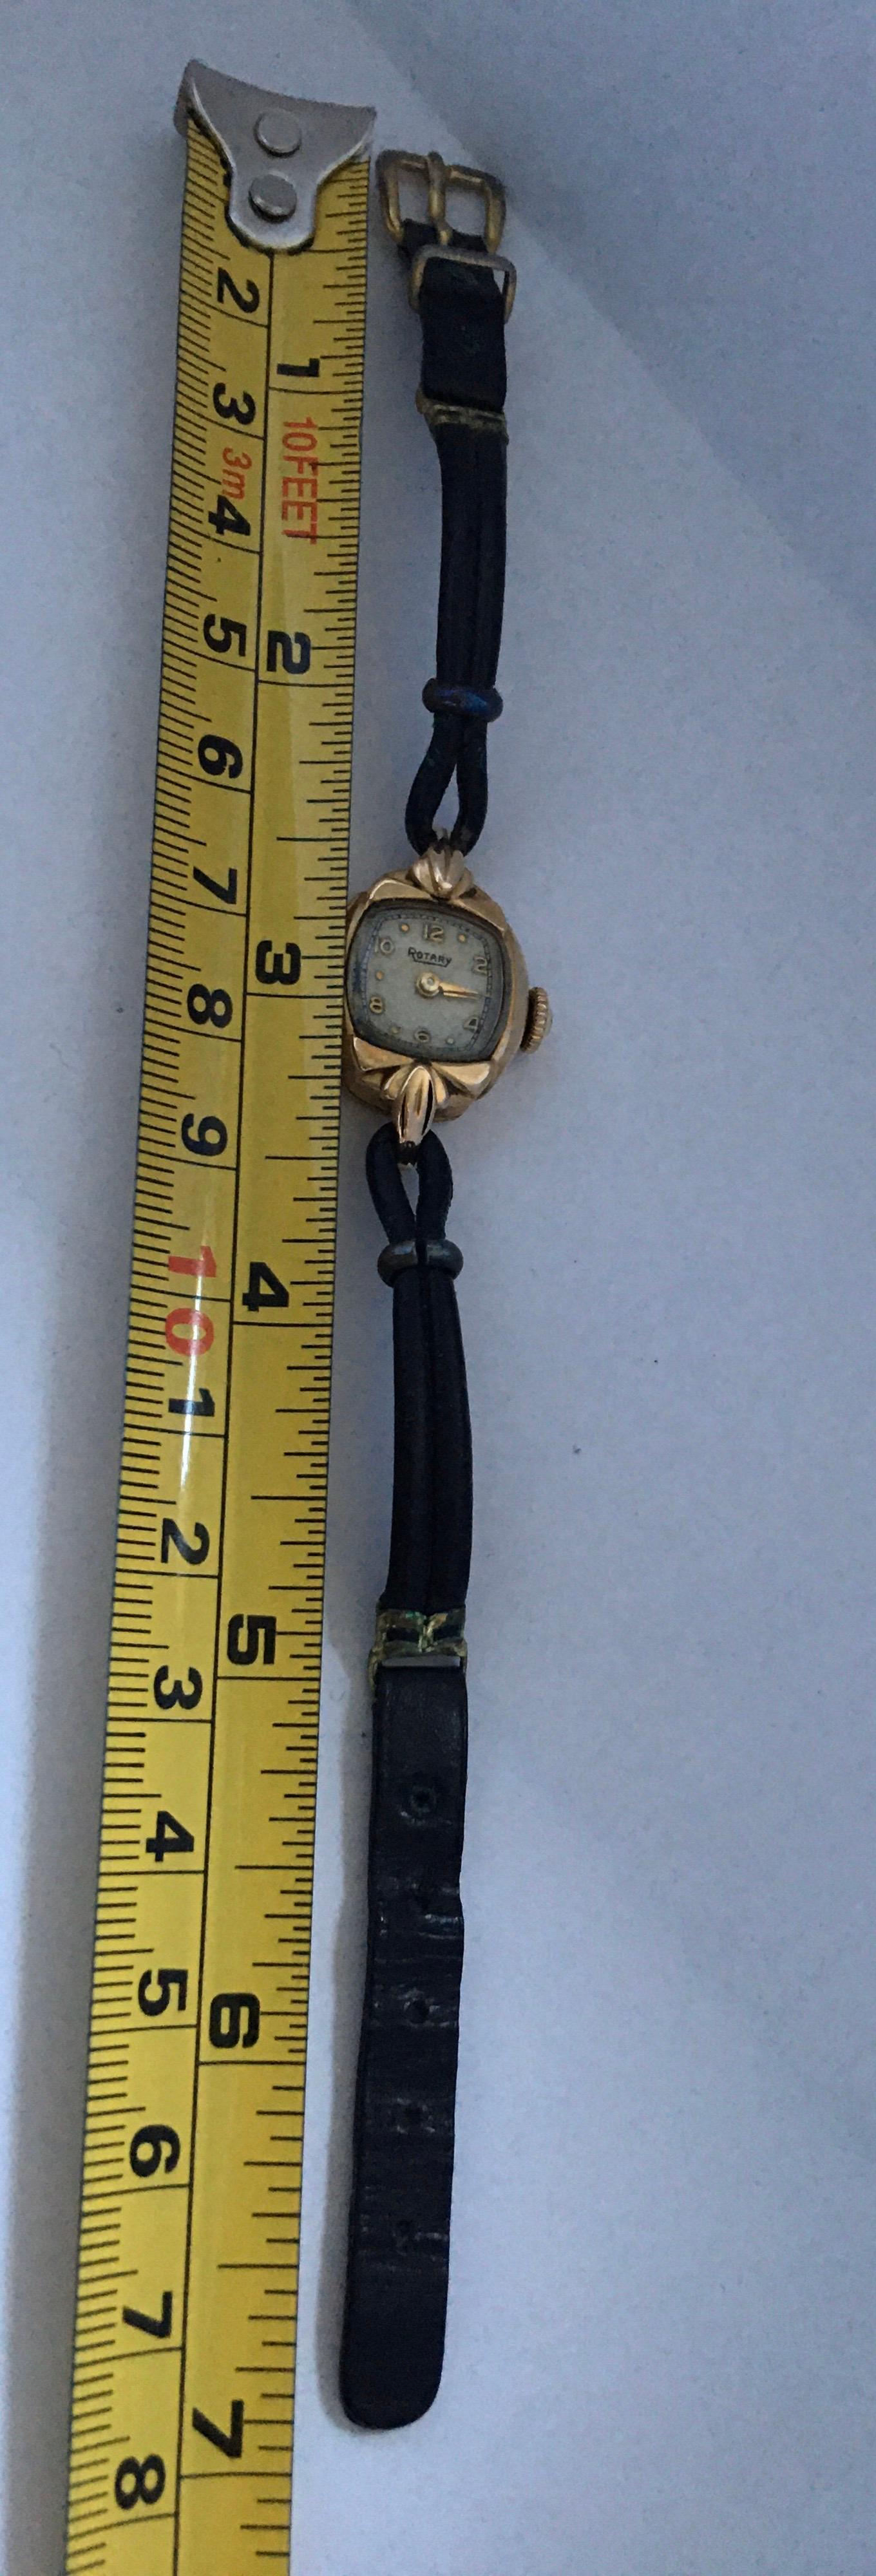 9 Karat Gold Vintage 1940s Rotary Ladies Cocktail Watch For Sale 3